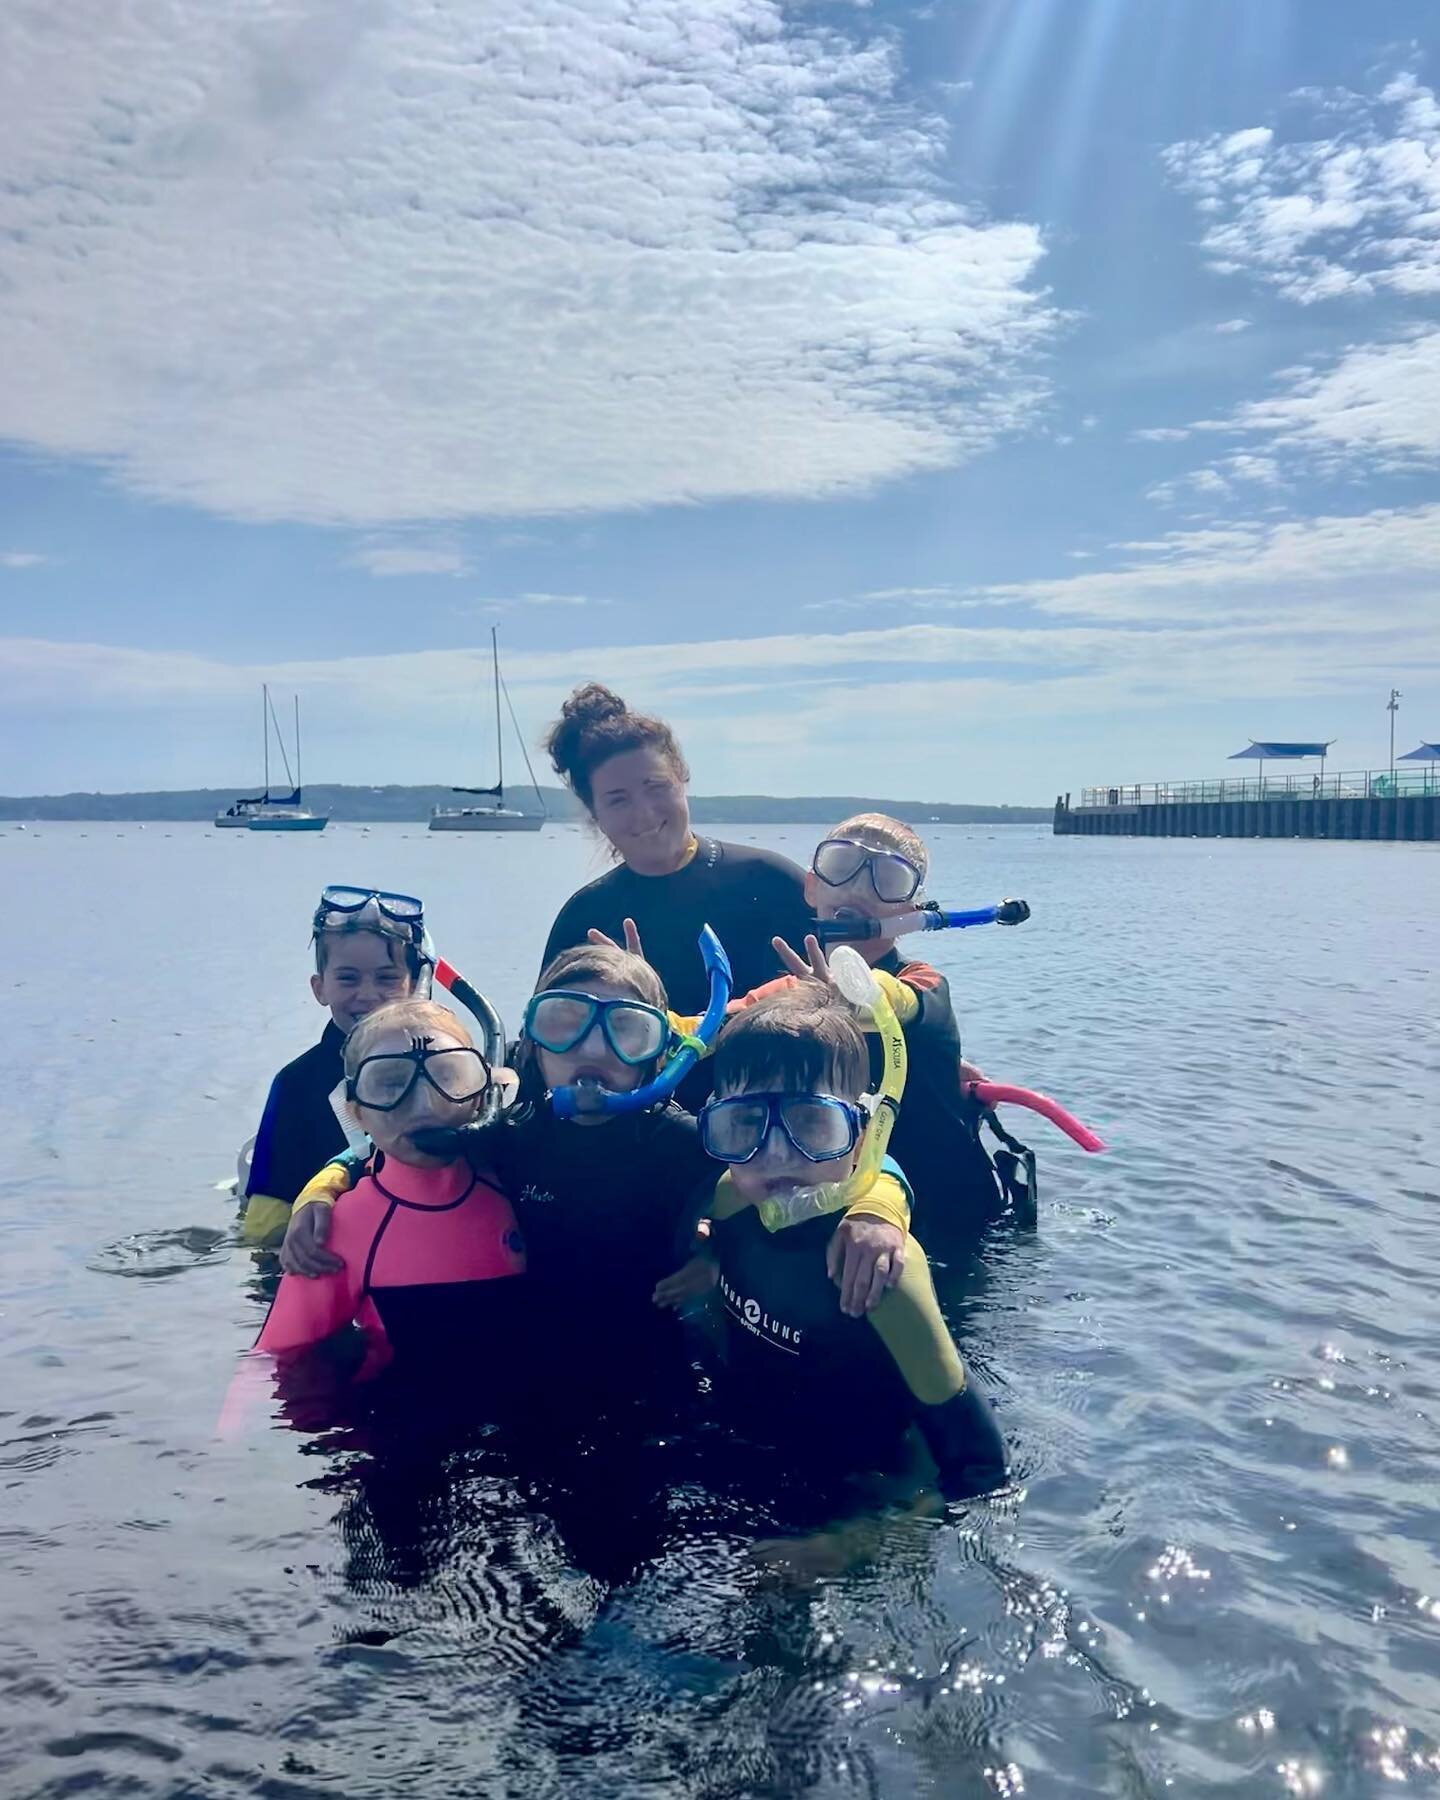 I gives me great happiness to introduce new underwater opportunities to this age group! They are ALL so darn smart and observant! Just a pretty cool thing to witness 🤿😎🤿